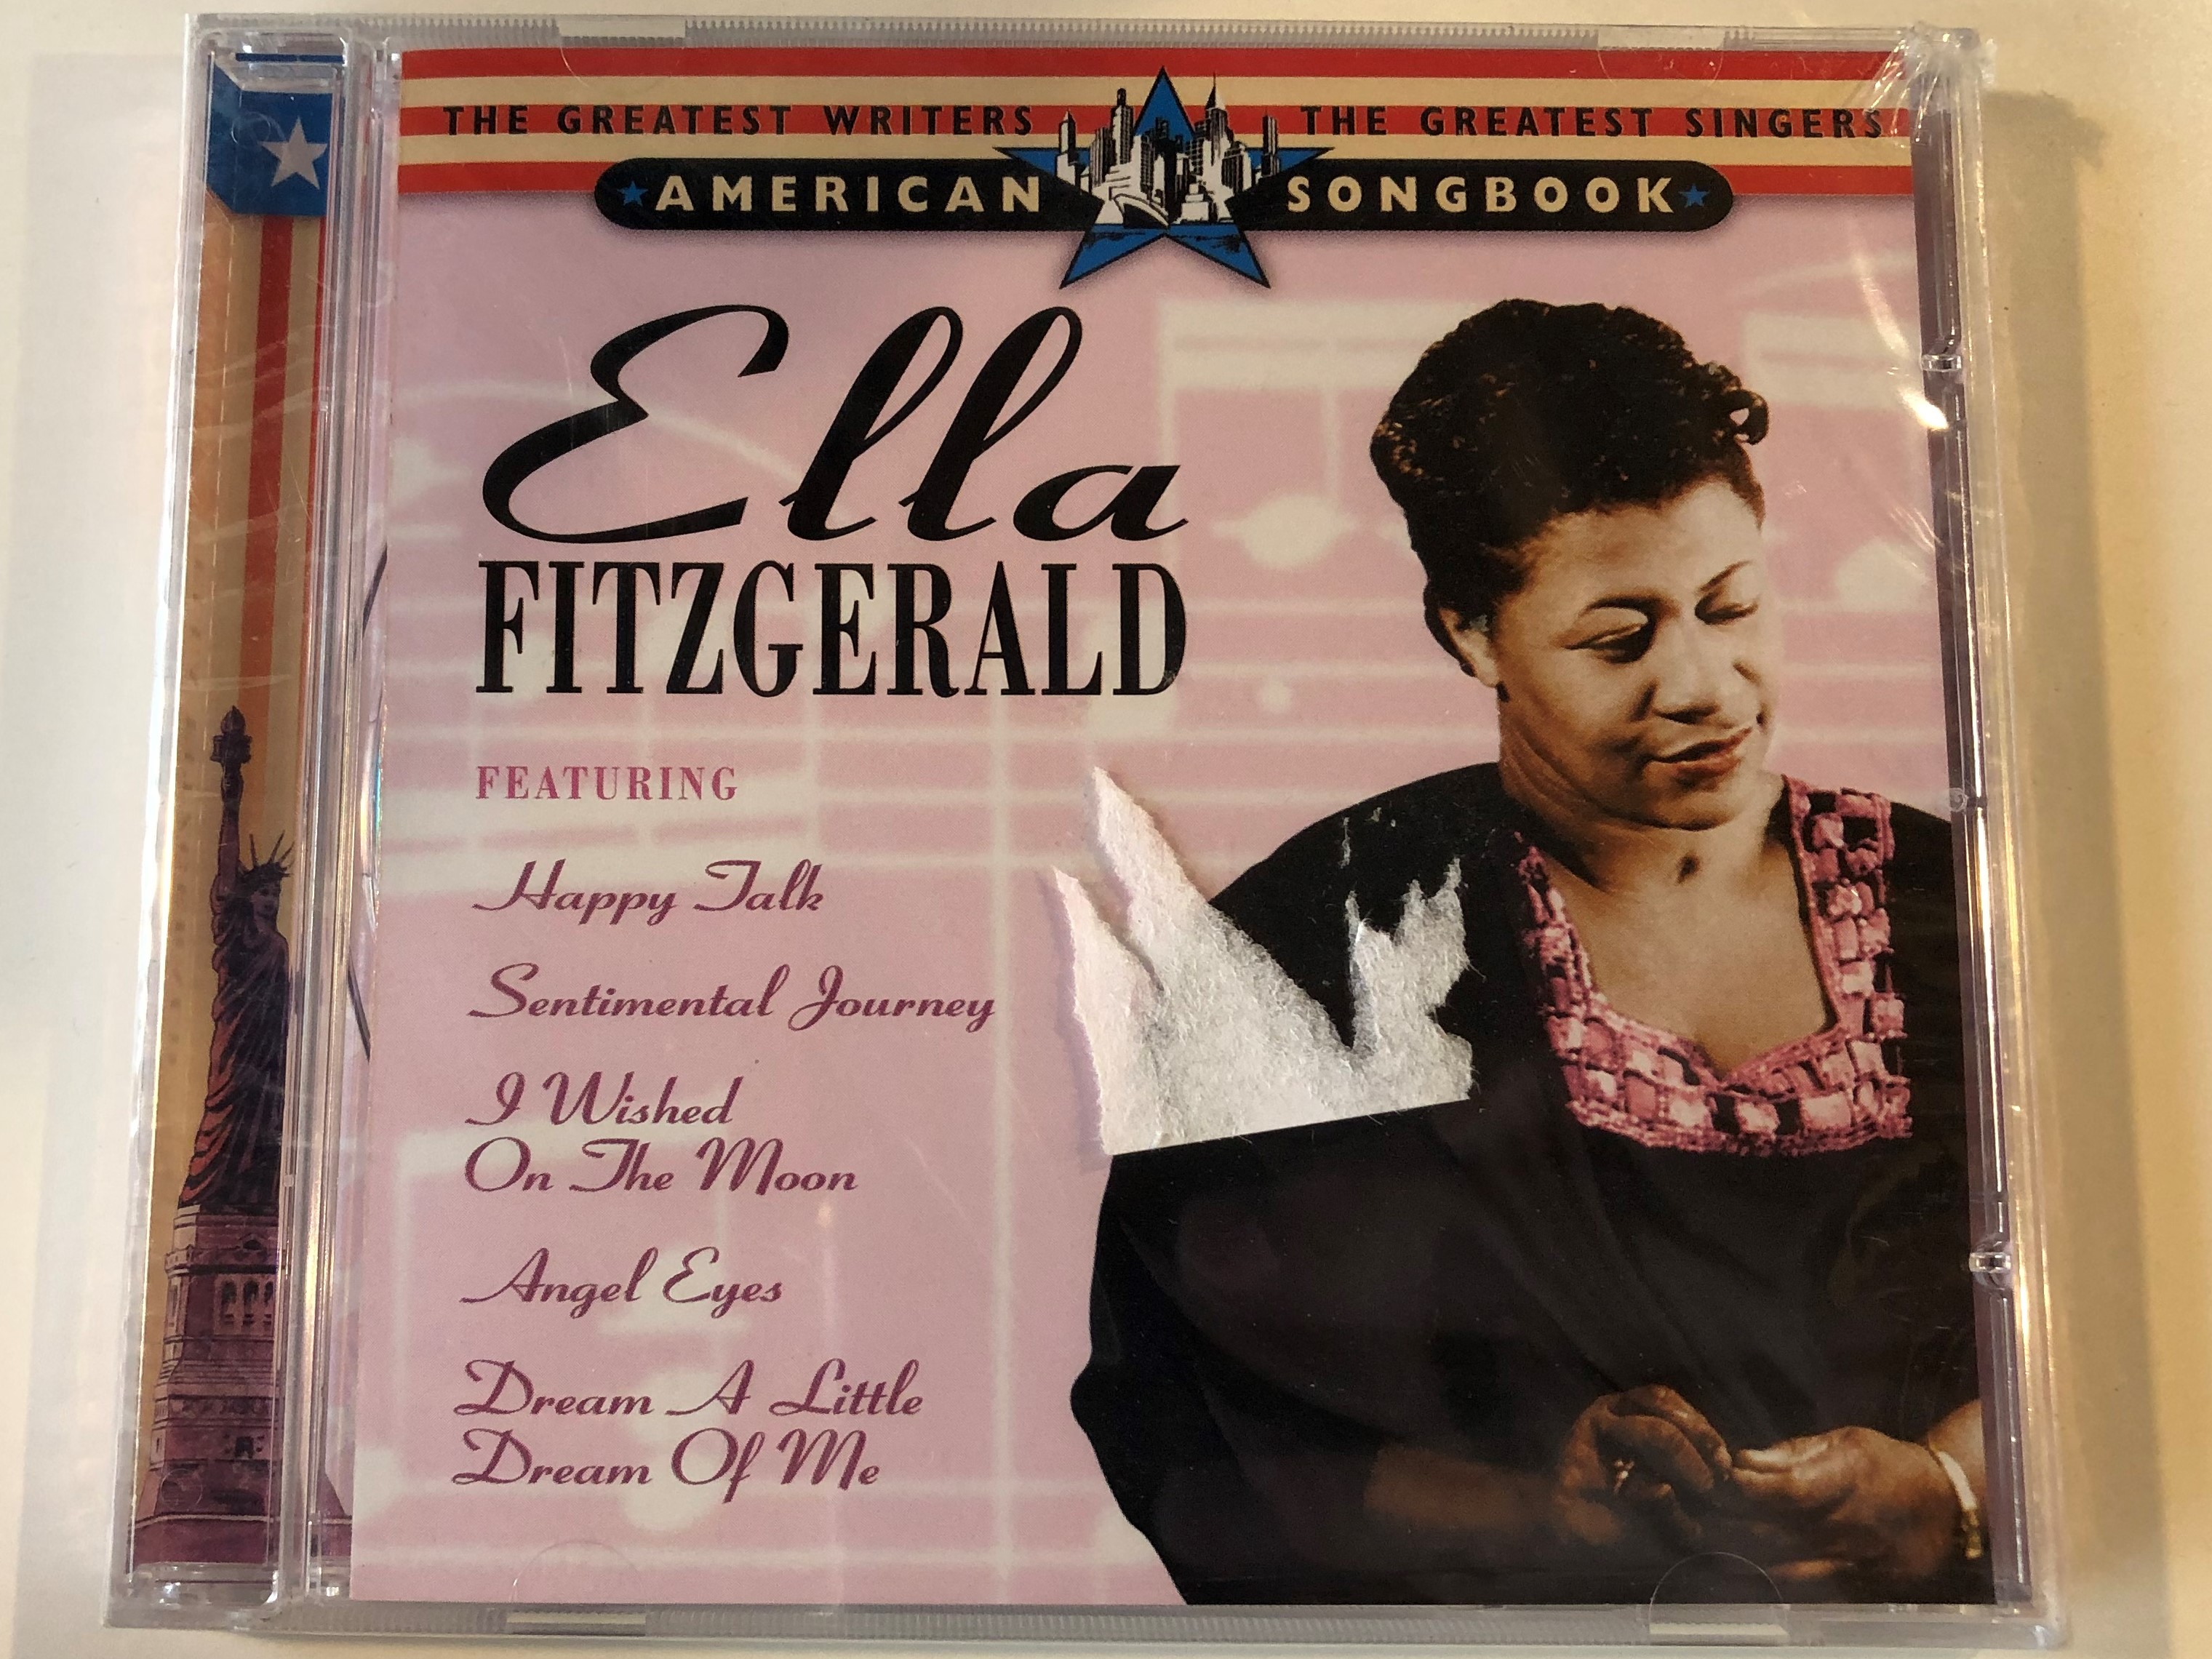 the-greatest-writers-the-greatest-singers-american-songbook-ella-fitzgerald-featuring-happy-talk-sentimental-journey-i-wished-on-the-moon-angel-eyes-dream-a-little-dream-of-me-prism-1-.jpg